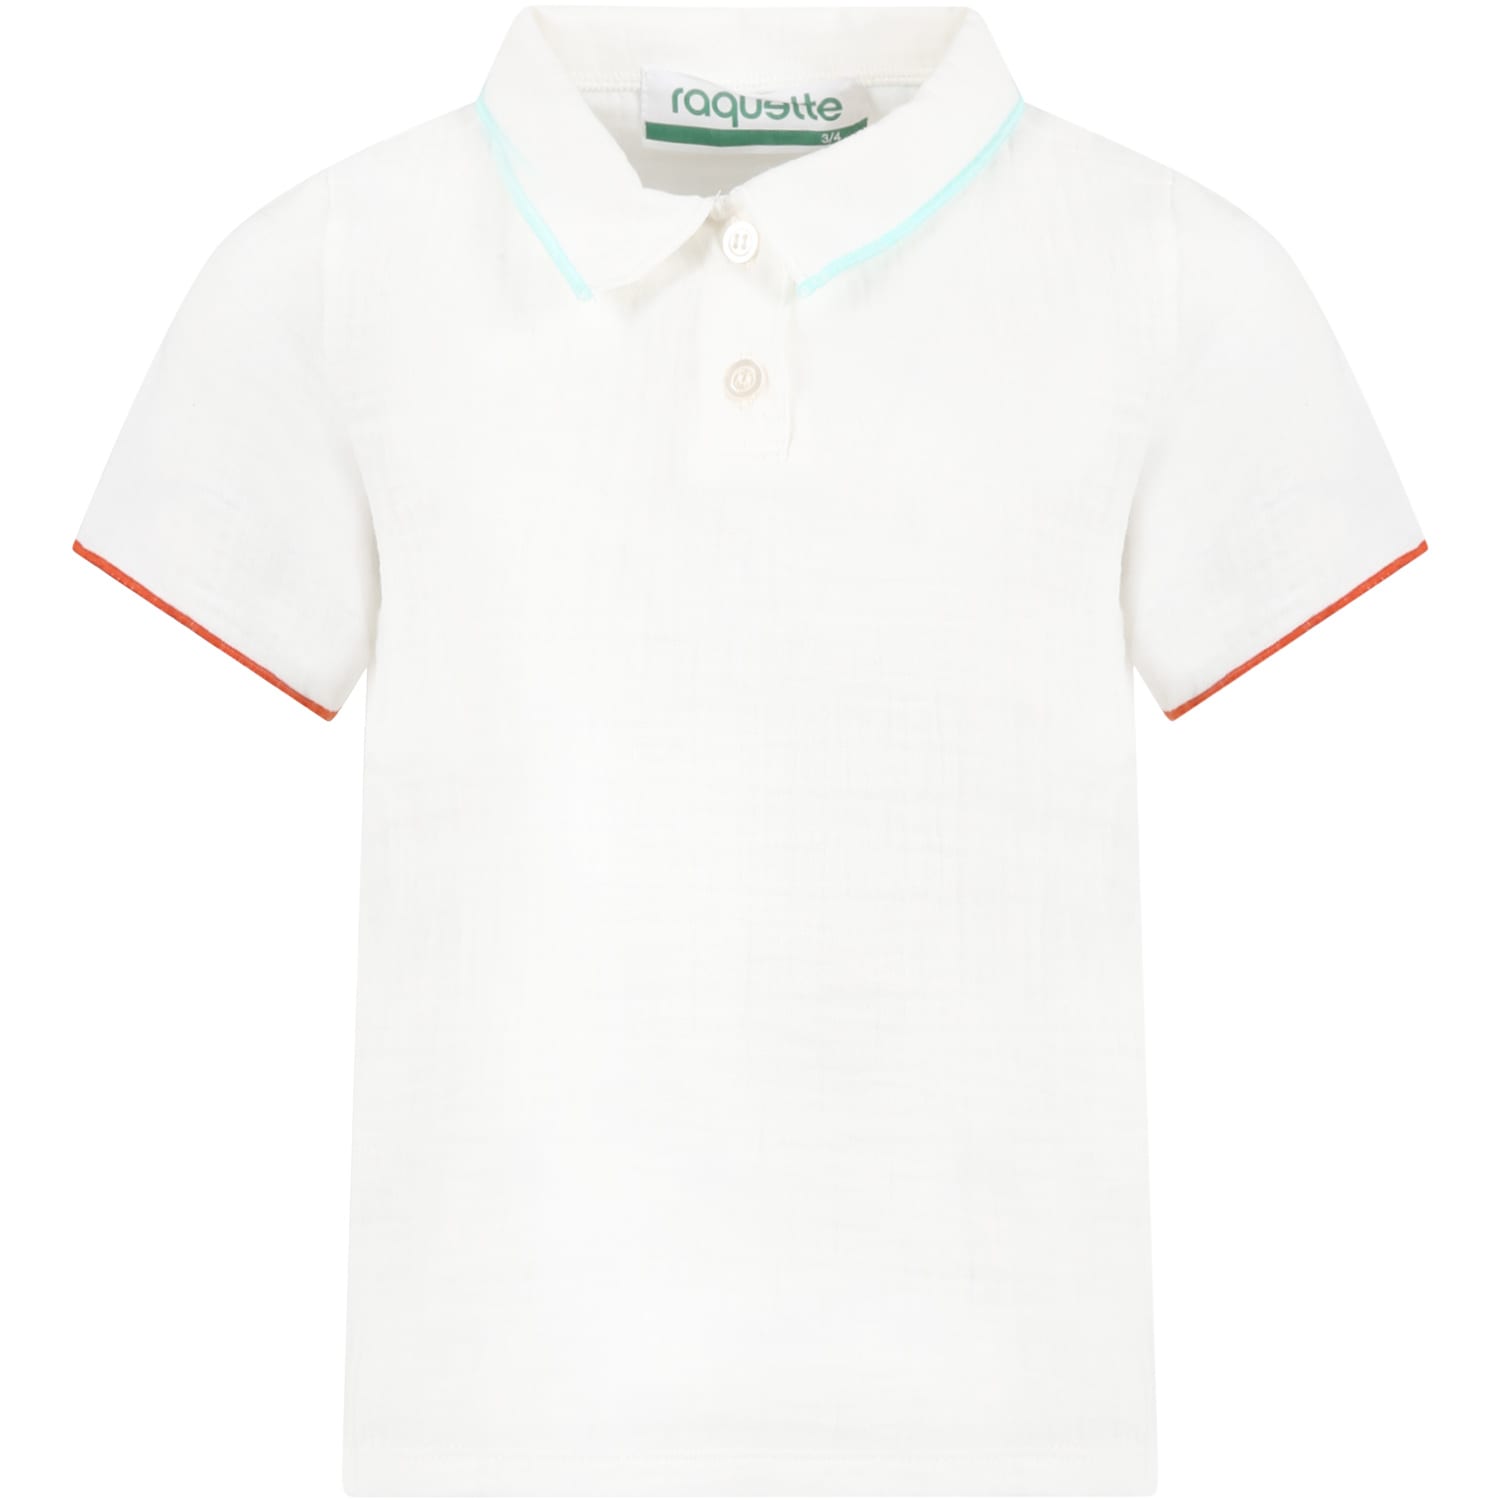 Raquette White Polo Shirt For Kids With Logo